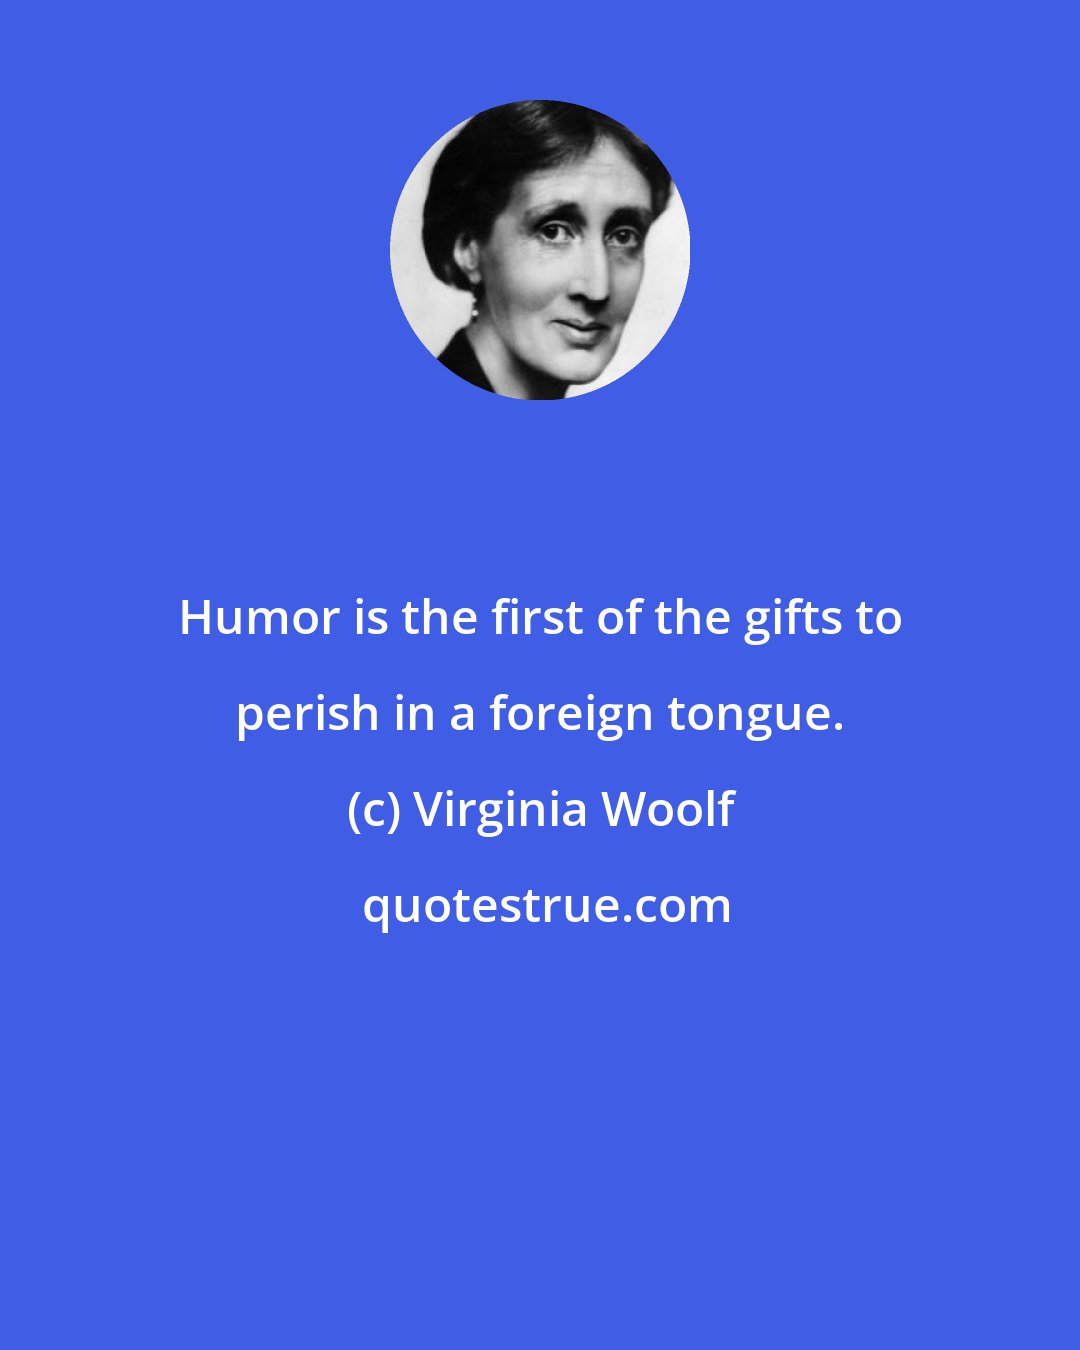 Virginia Woolf: Humor is the first of the gifts to perish in a foreign tongue.